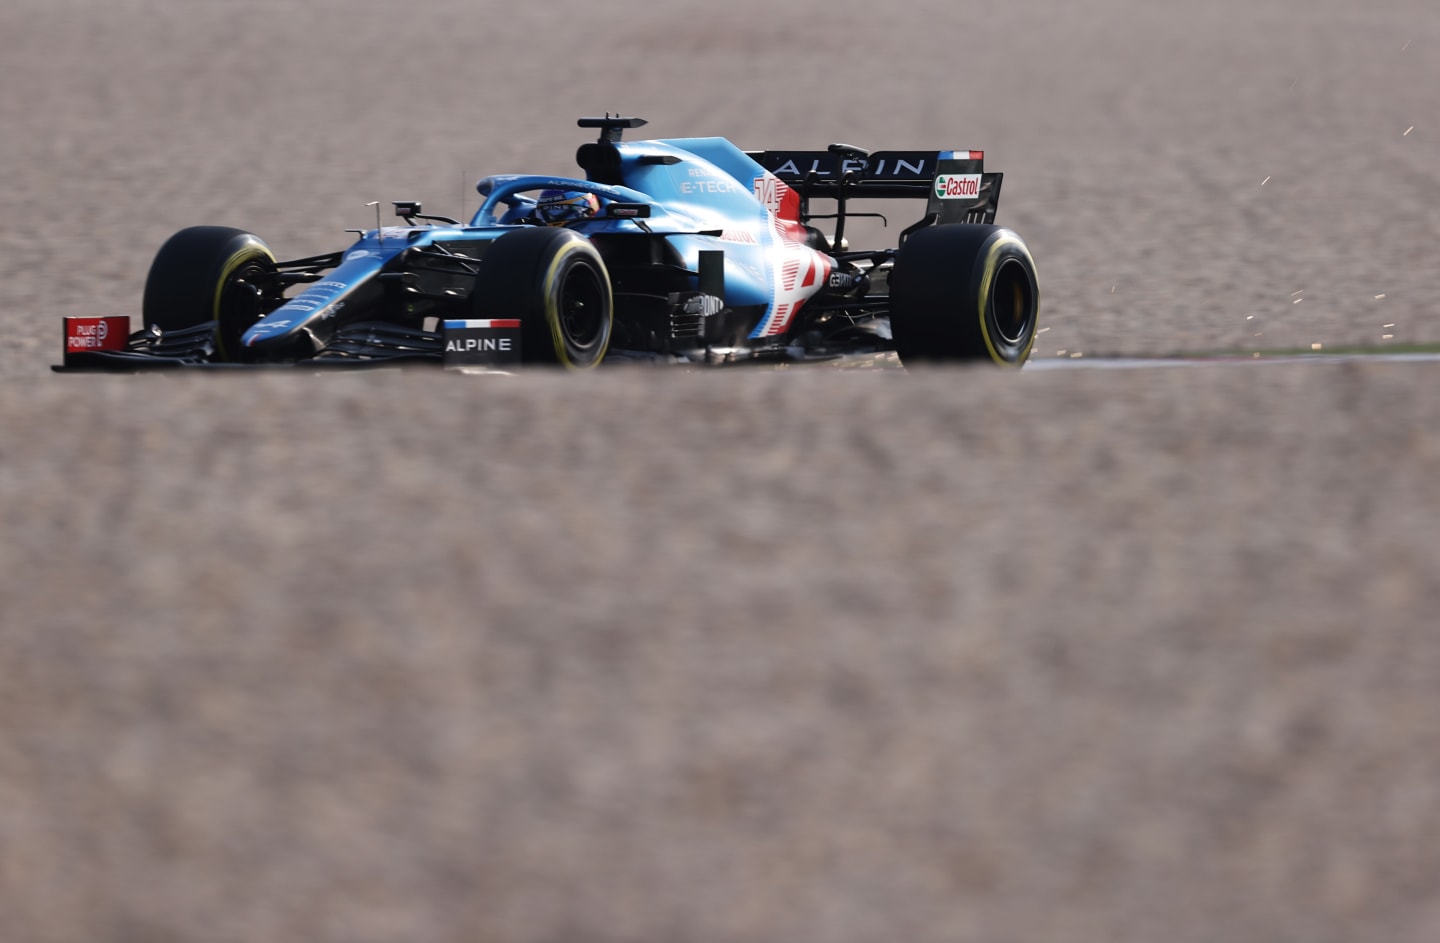 DOHA, QATAR - NOVEMBER 20: Fernando Alonso of Spain driving the (14) Alpine A521 Renault during final practice ahead of the F1 Grand Prix of Qatar at Losail International Circuit on November 20, 2021 in Doha, Qatar. (Photo by Lars Baron/Getty Images)